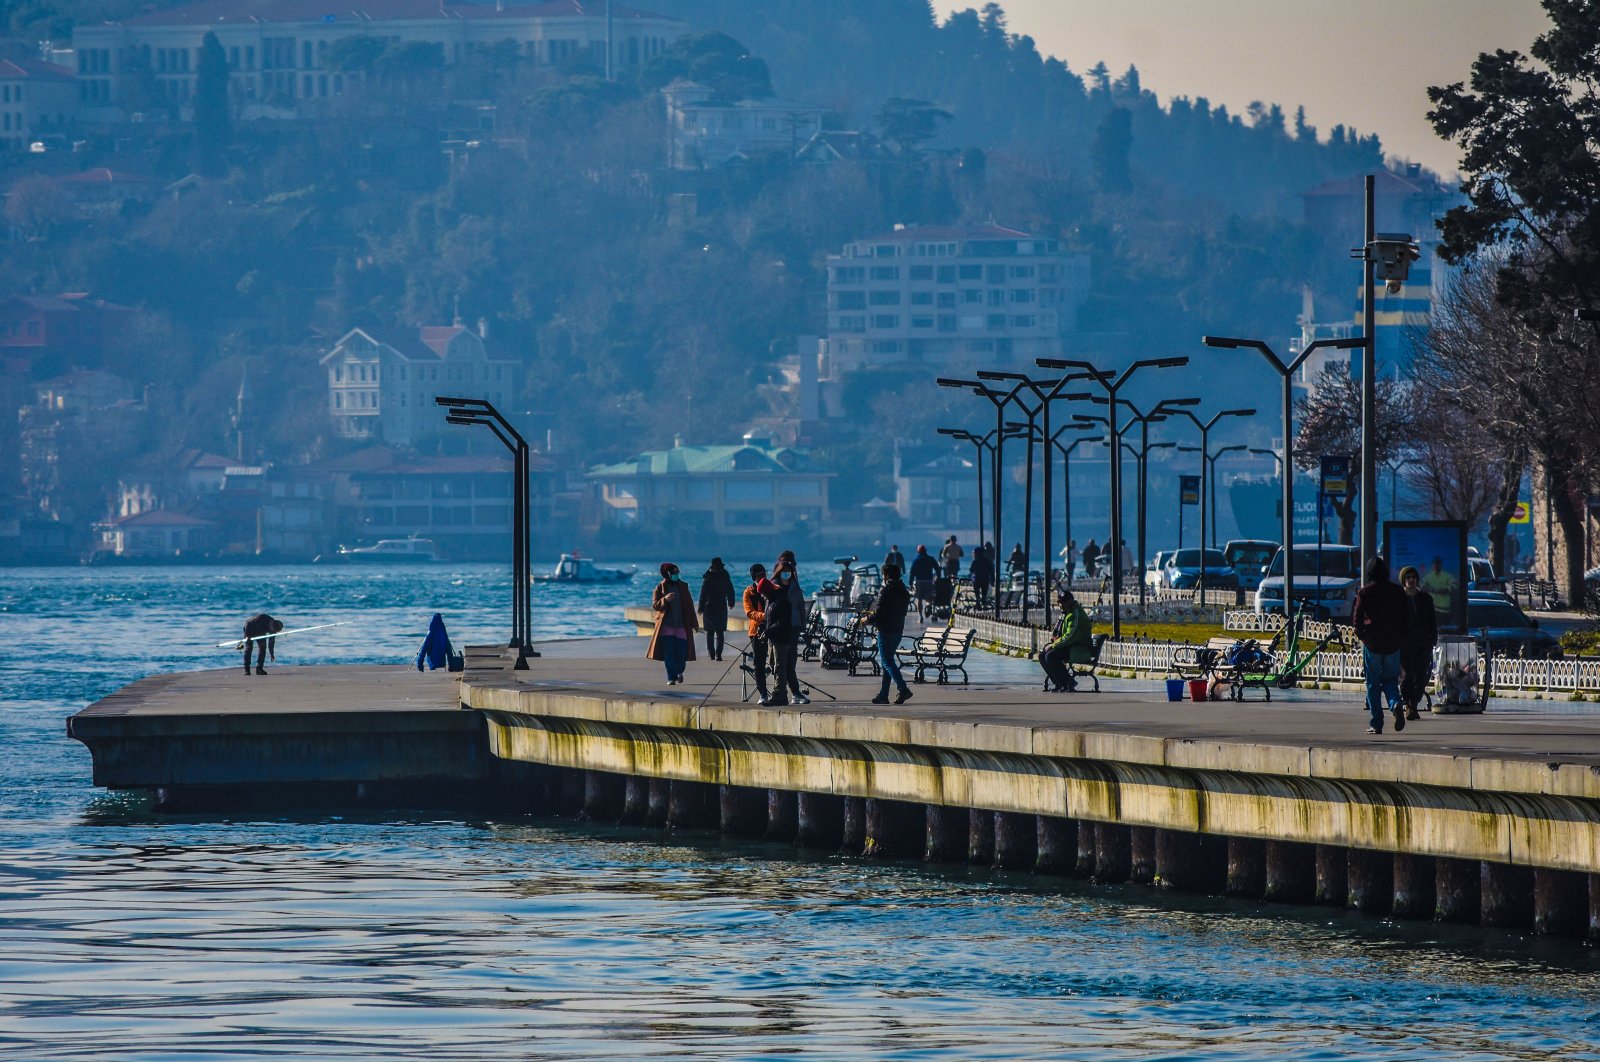 People enjoy sunny weather on a coastline in the Sarıyer district, Istanbul, Turkey, March 3, 2021. (Photo by Getty Images)